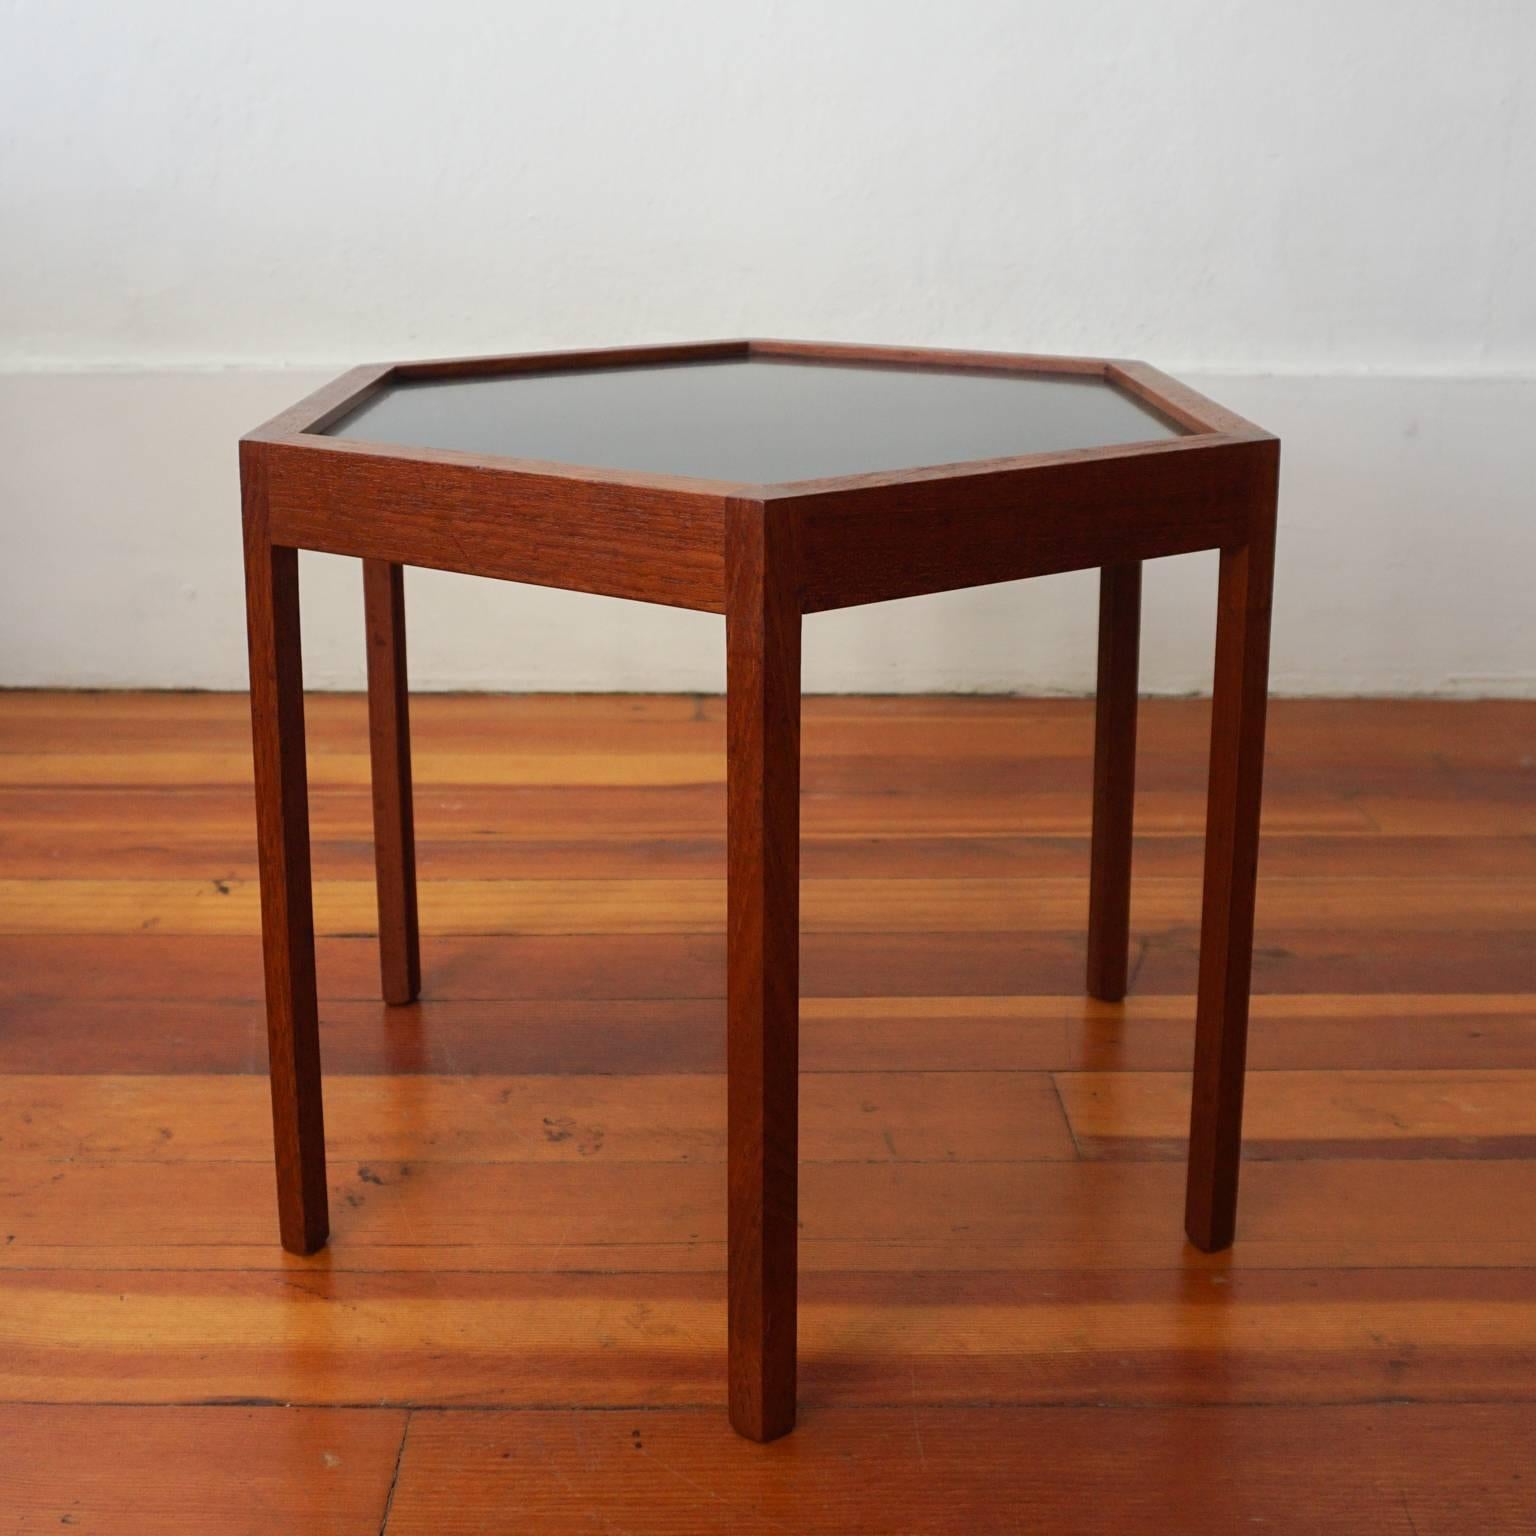 Hans C Andersen teak hexagon side table for Artex. Beautifully crafted, with skilful joinery. Retains a label from the shop it was originally purchased at. Made in Denmark. Signed, 1950s.